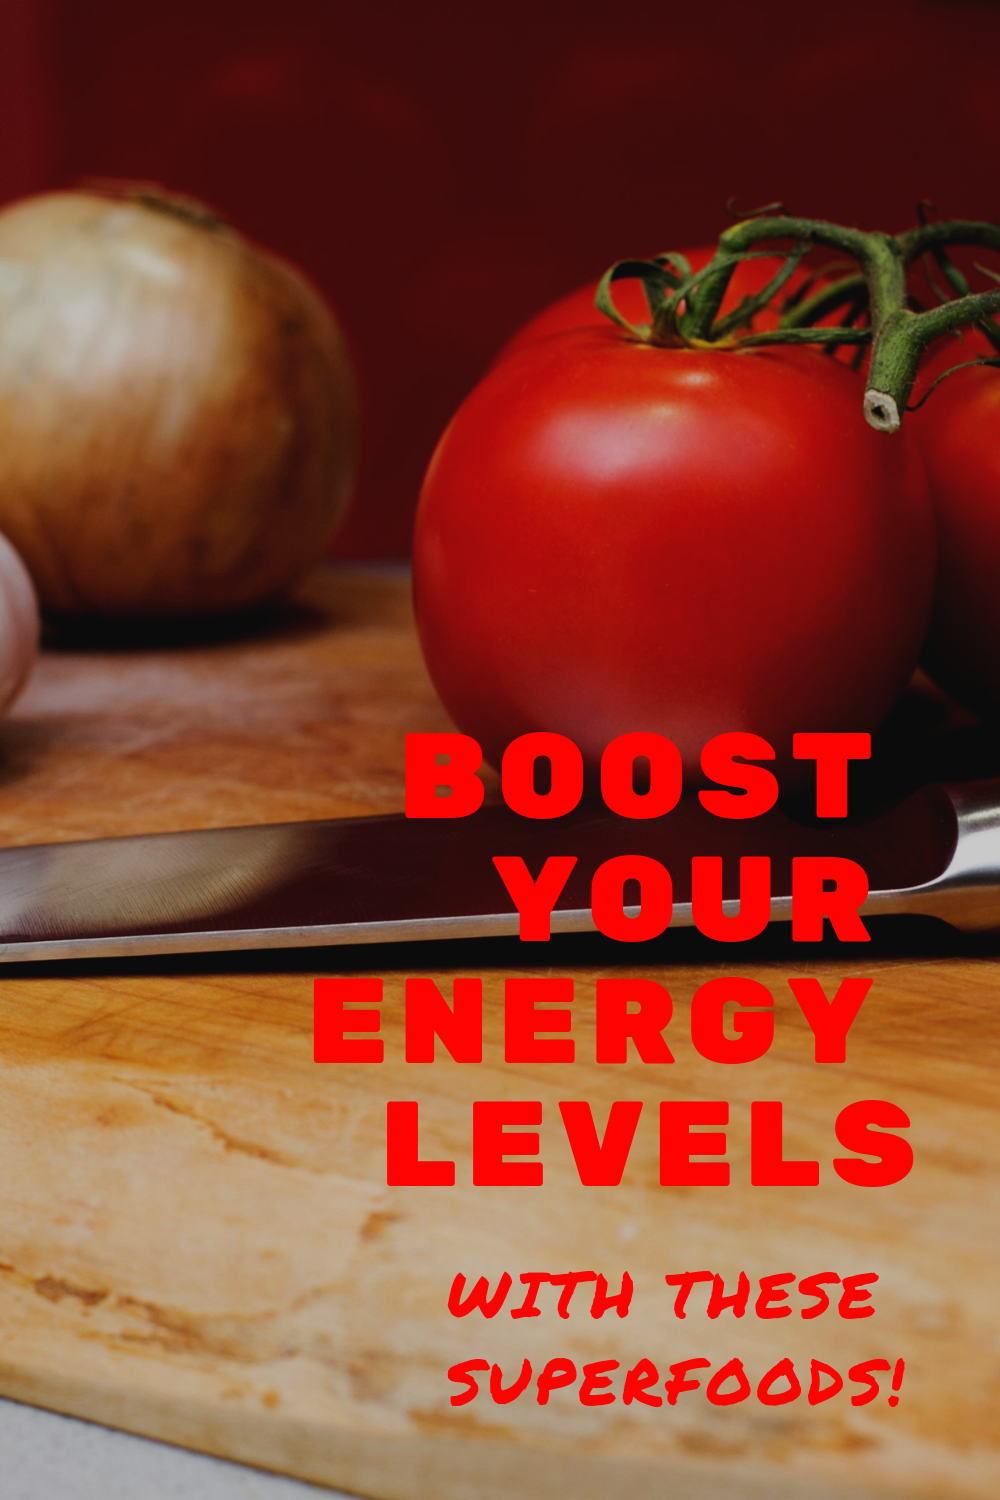 Boost your Energy Levels With these Superfoods-Waakiki Blog -   24 fitness fashion posts
 ideas